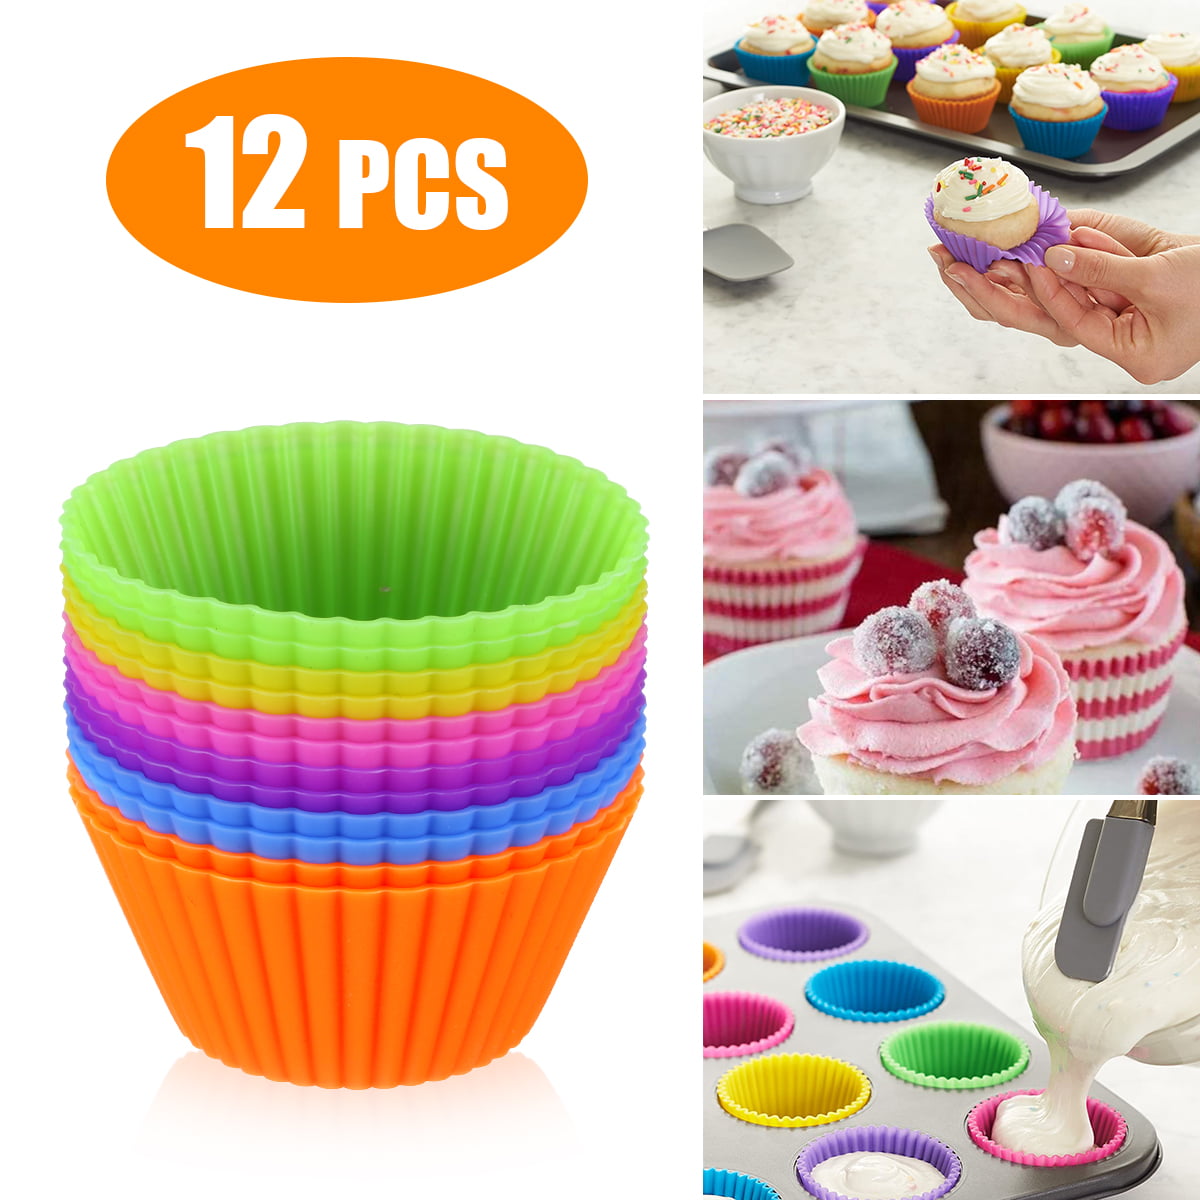 12pcs Silicone Cup Cake Muffin Chocolate Wrappers Roast Cookies 